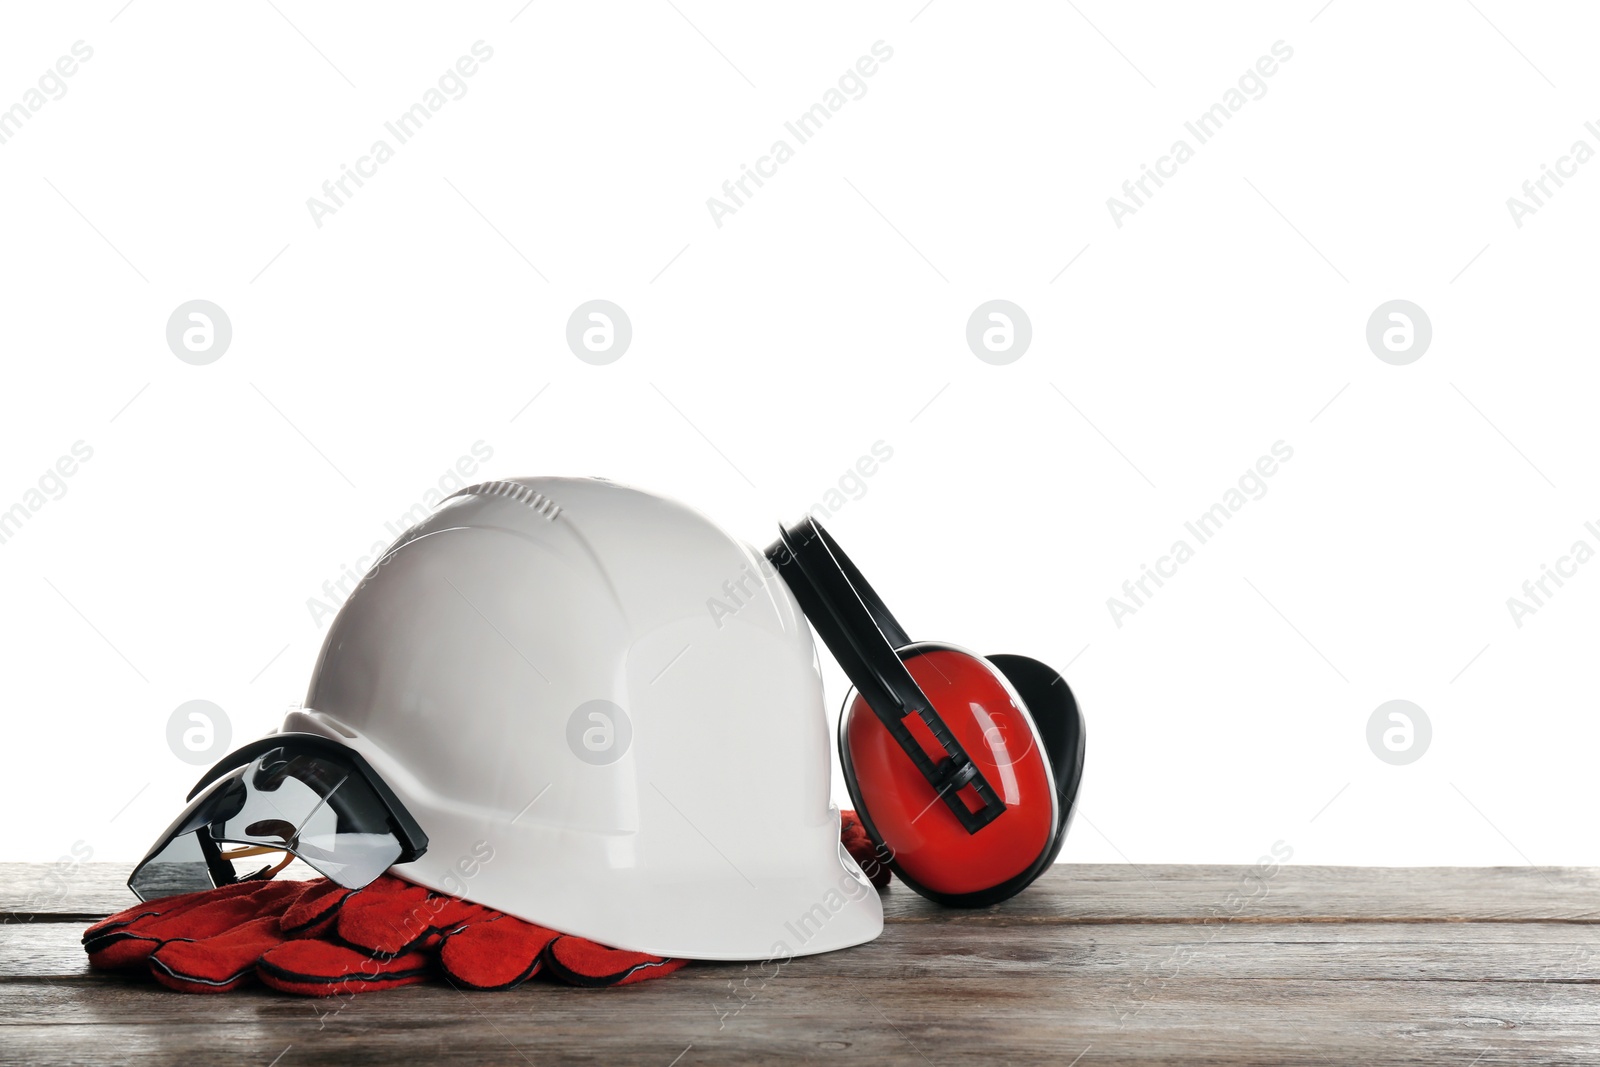 Photo of Set of safety equipment on table against white background